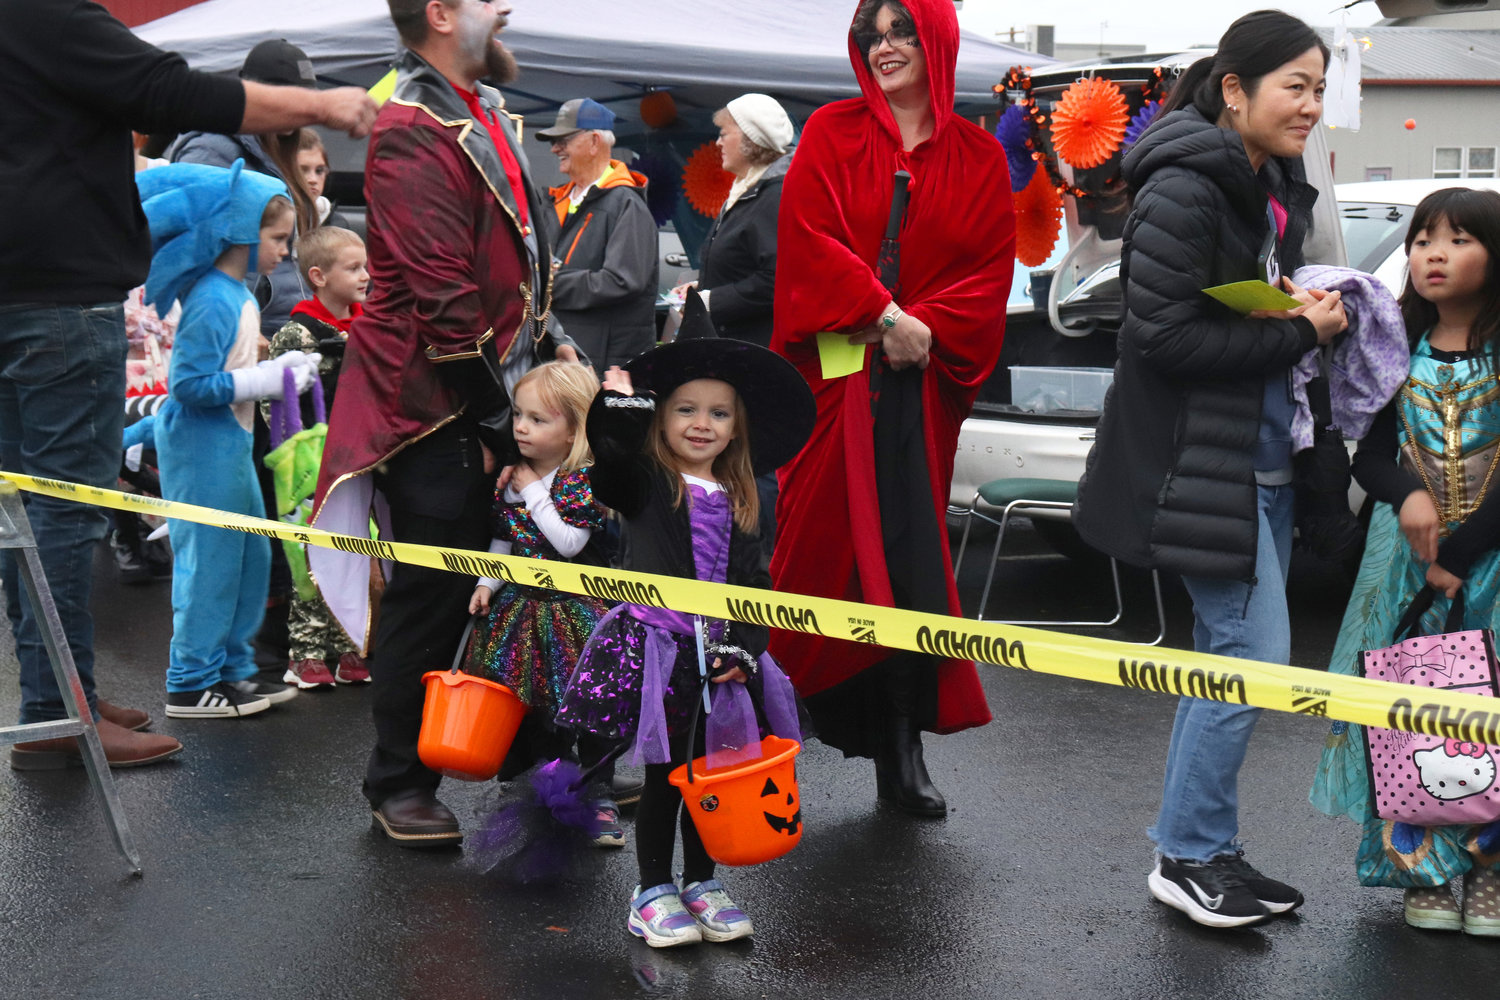 Adelaide, who turns 5 next week, waves to the camera while in line at Napavine Assembly of God Church’s trunk or treat event on Monday.